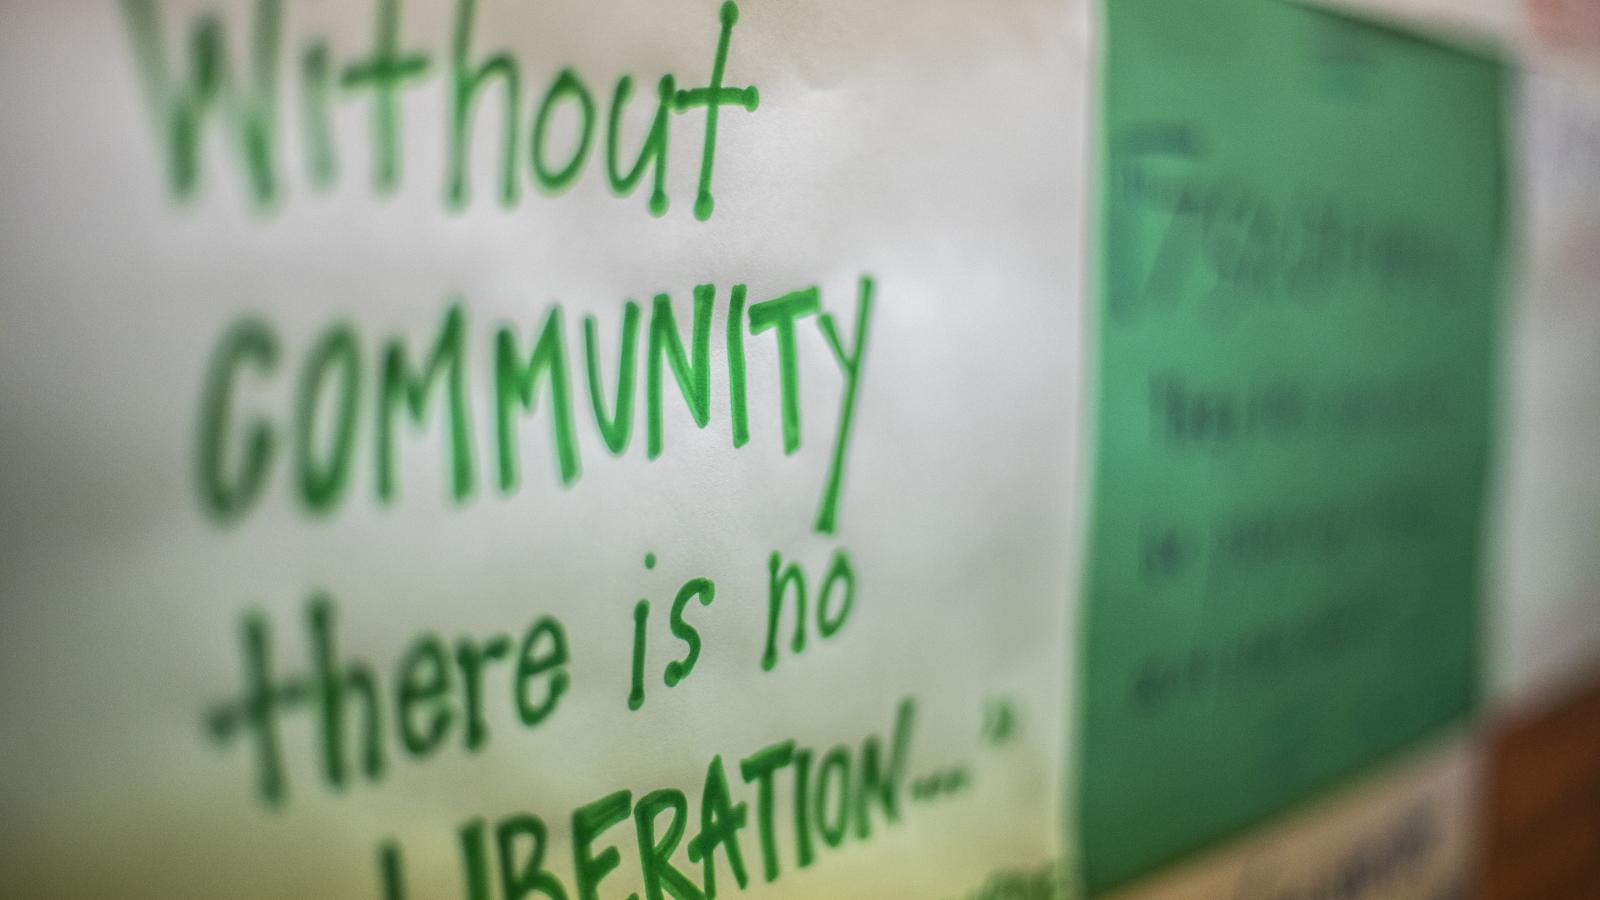 Handwritten inspirational community sign featuring a quote by Audre Lorde, "Without community there is no liberation"